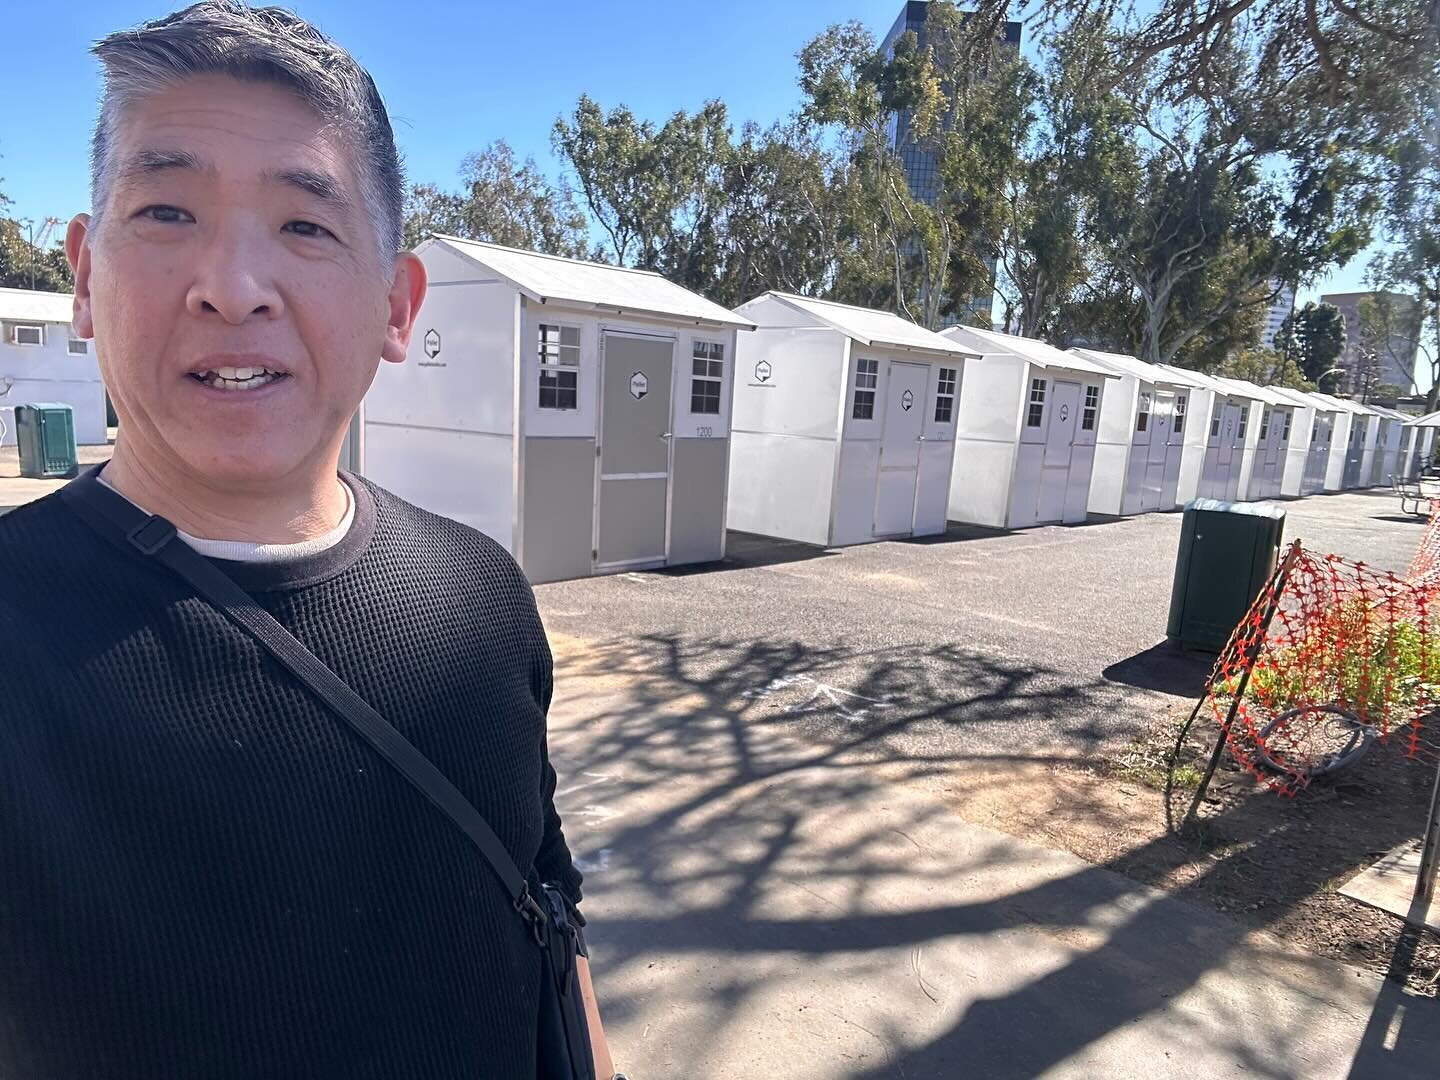 This veterans tiny home community in Santa Monica was very well patrolled with security and is on the grounds of the VA West Los Angeles Campus. #housed